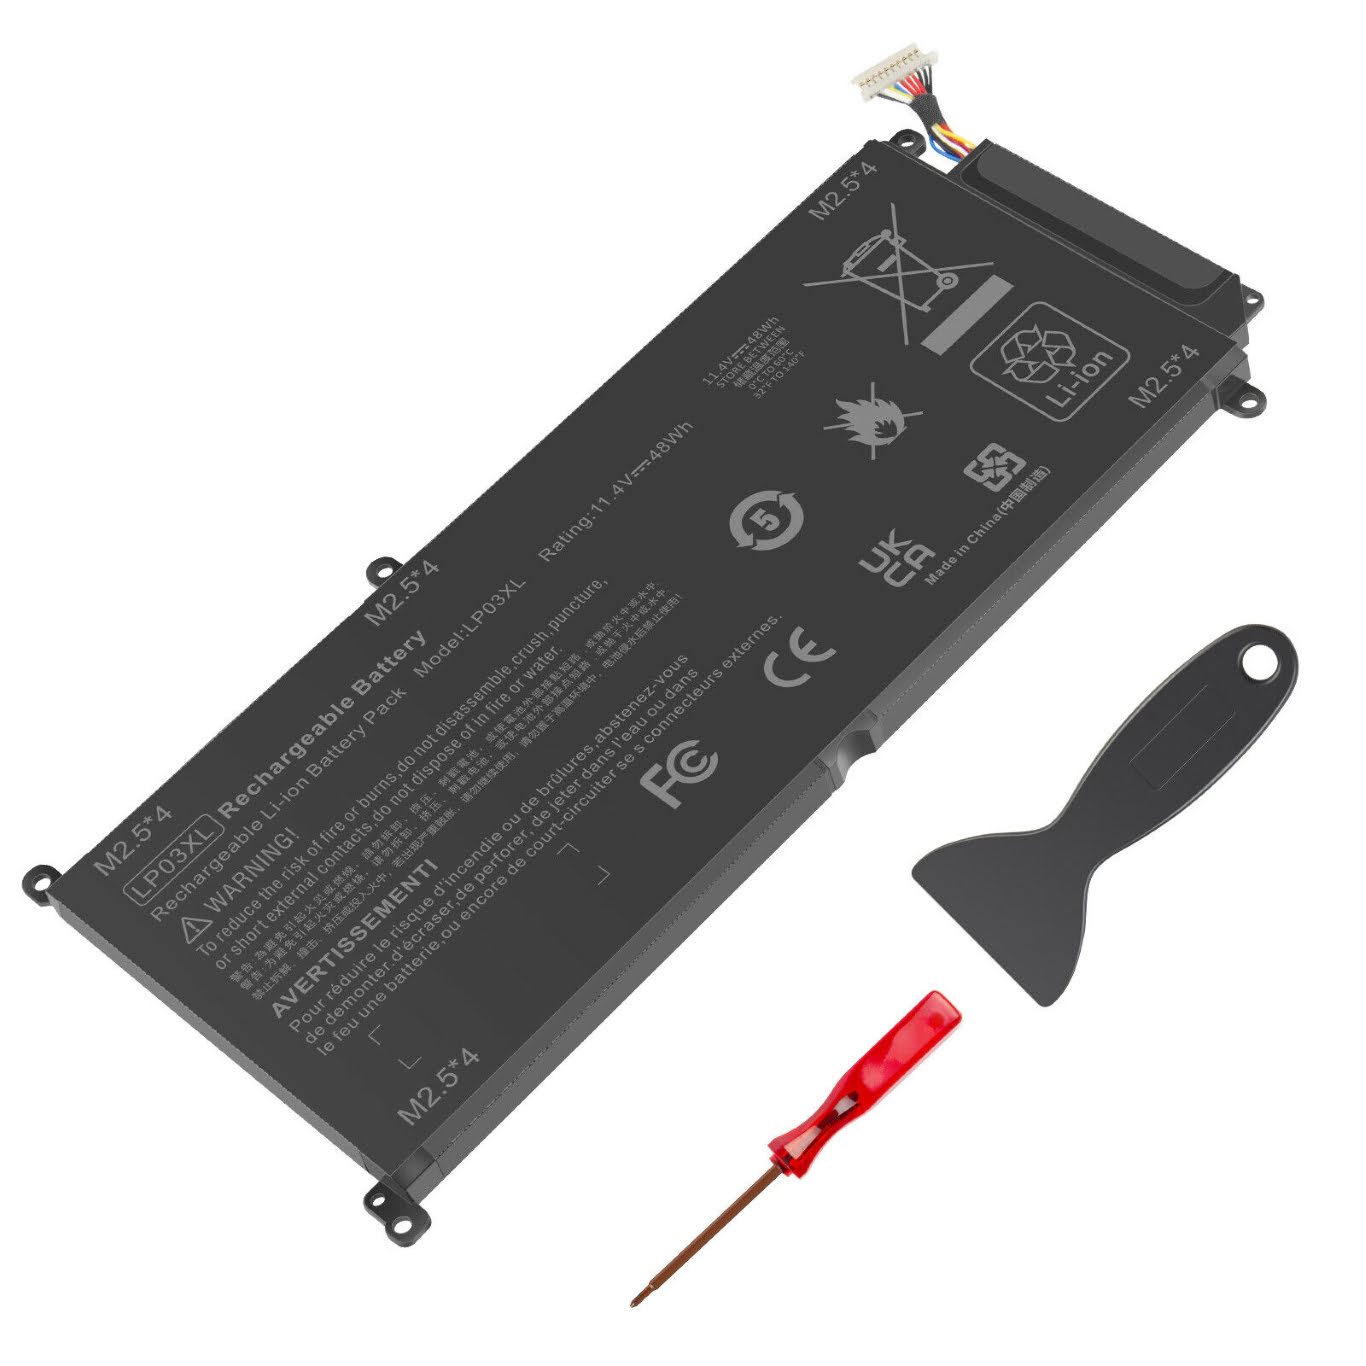 804072-241, 804072-541 replacement Laptop Battery for HP Envy 14-J Series, Envy 15-AE000 Series, 3 cells, 11.4v, 60wh